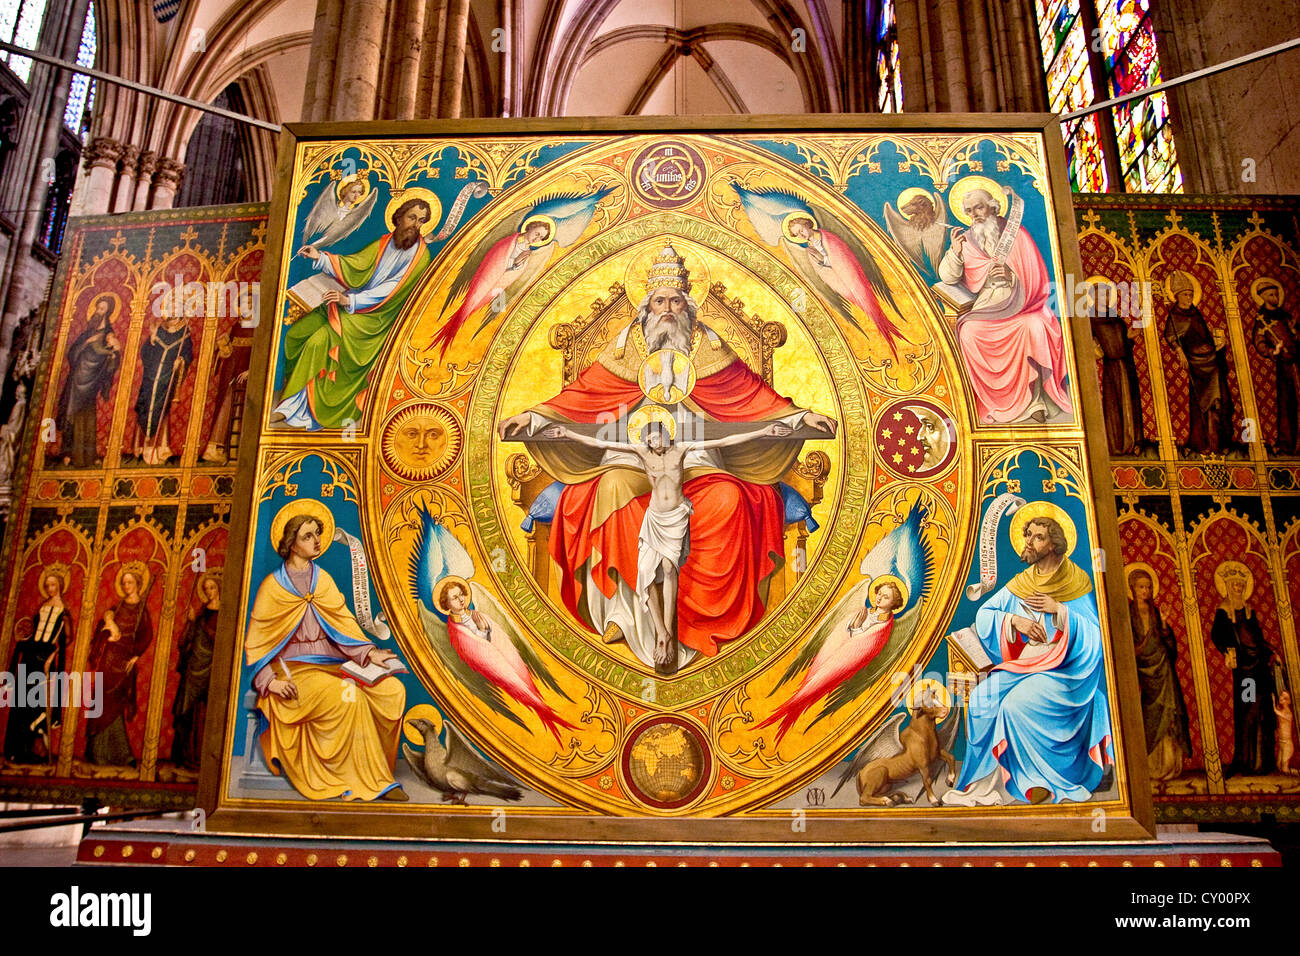 Cologne Germany Alter Painting In The Interior Of The